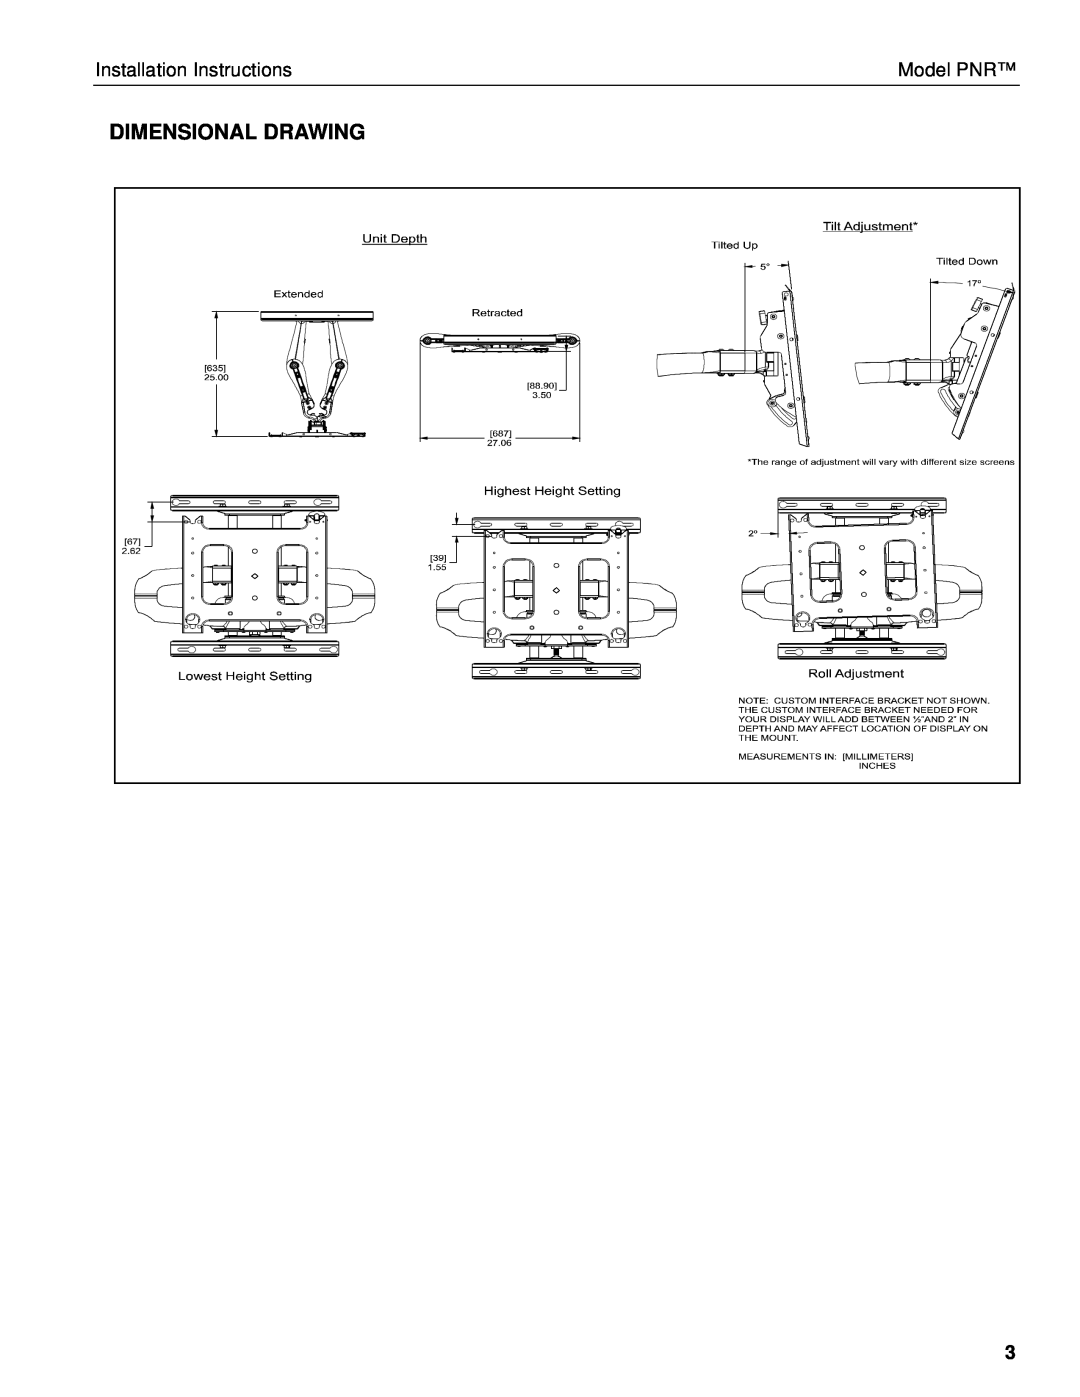 Chief Manufacturing installation instructions Dimensional Drawing, Installation Instructions, Model PNR 